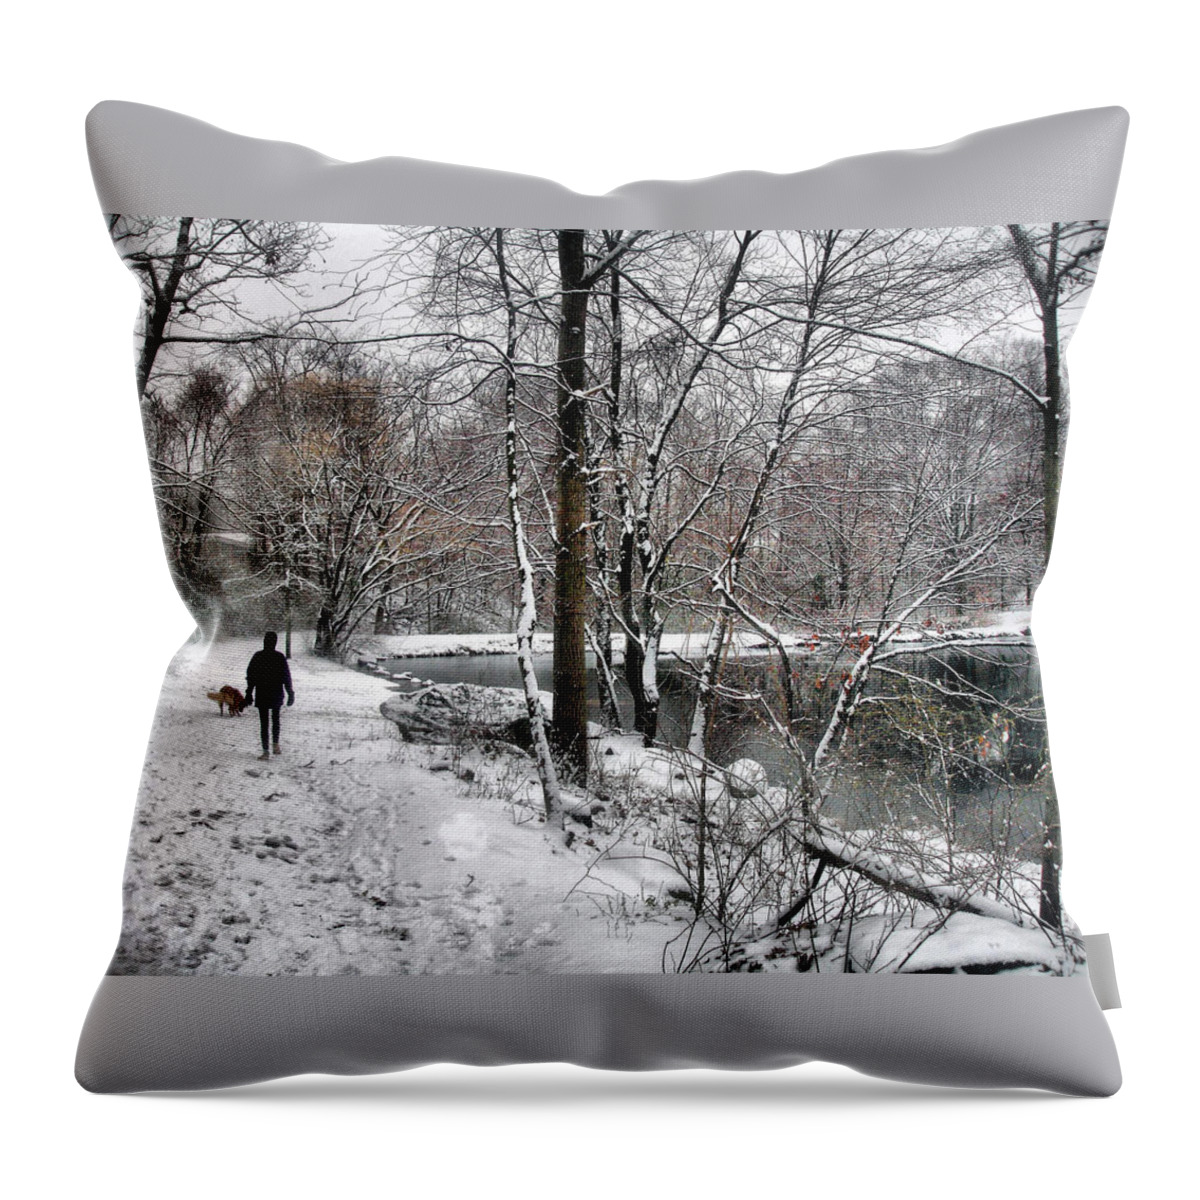 Snow Throw Pillow featuring the photograph Snowy Walk by the Pond by Russel Considine